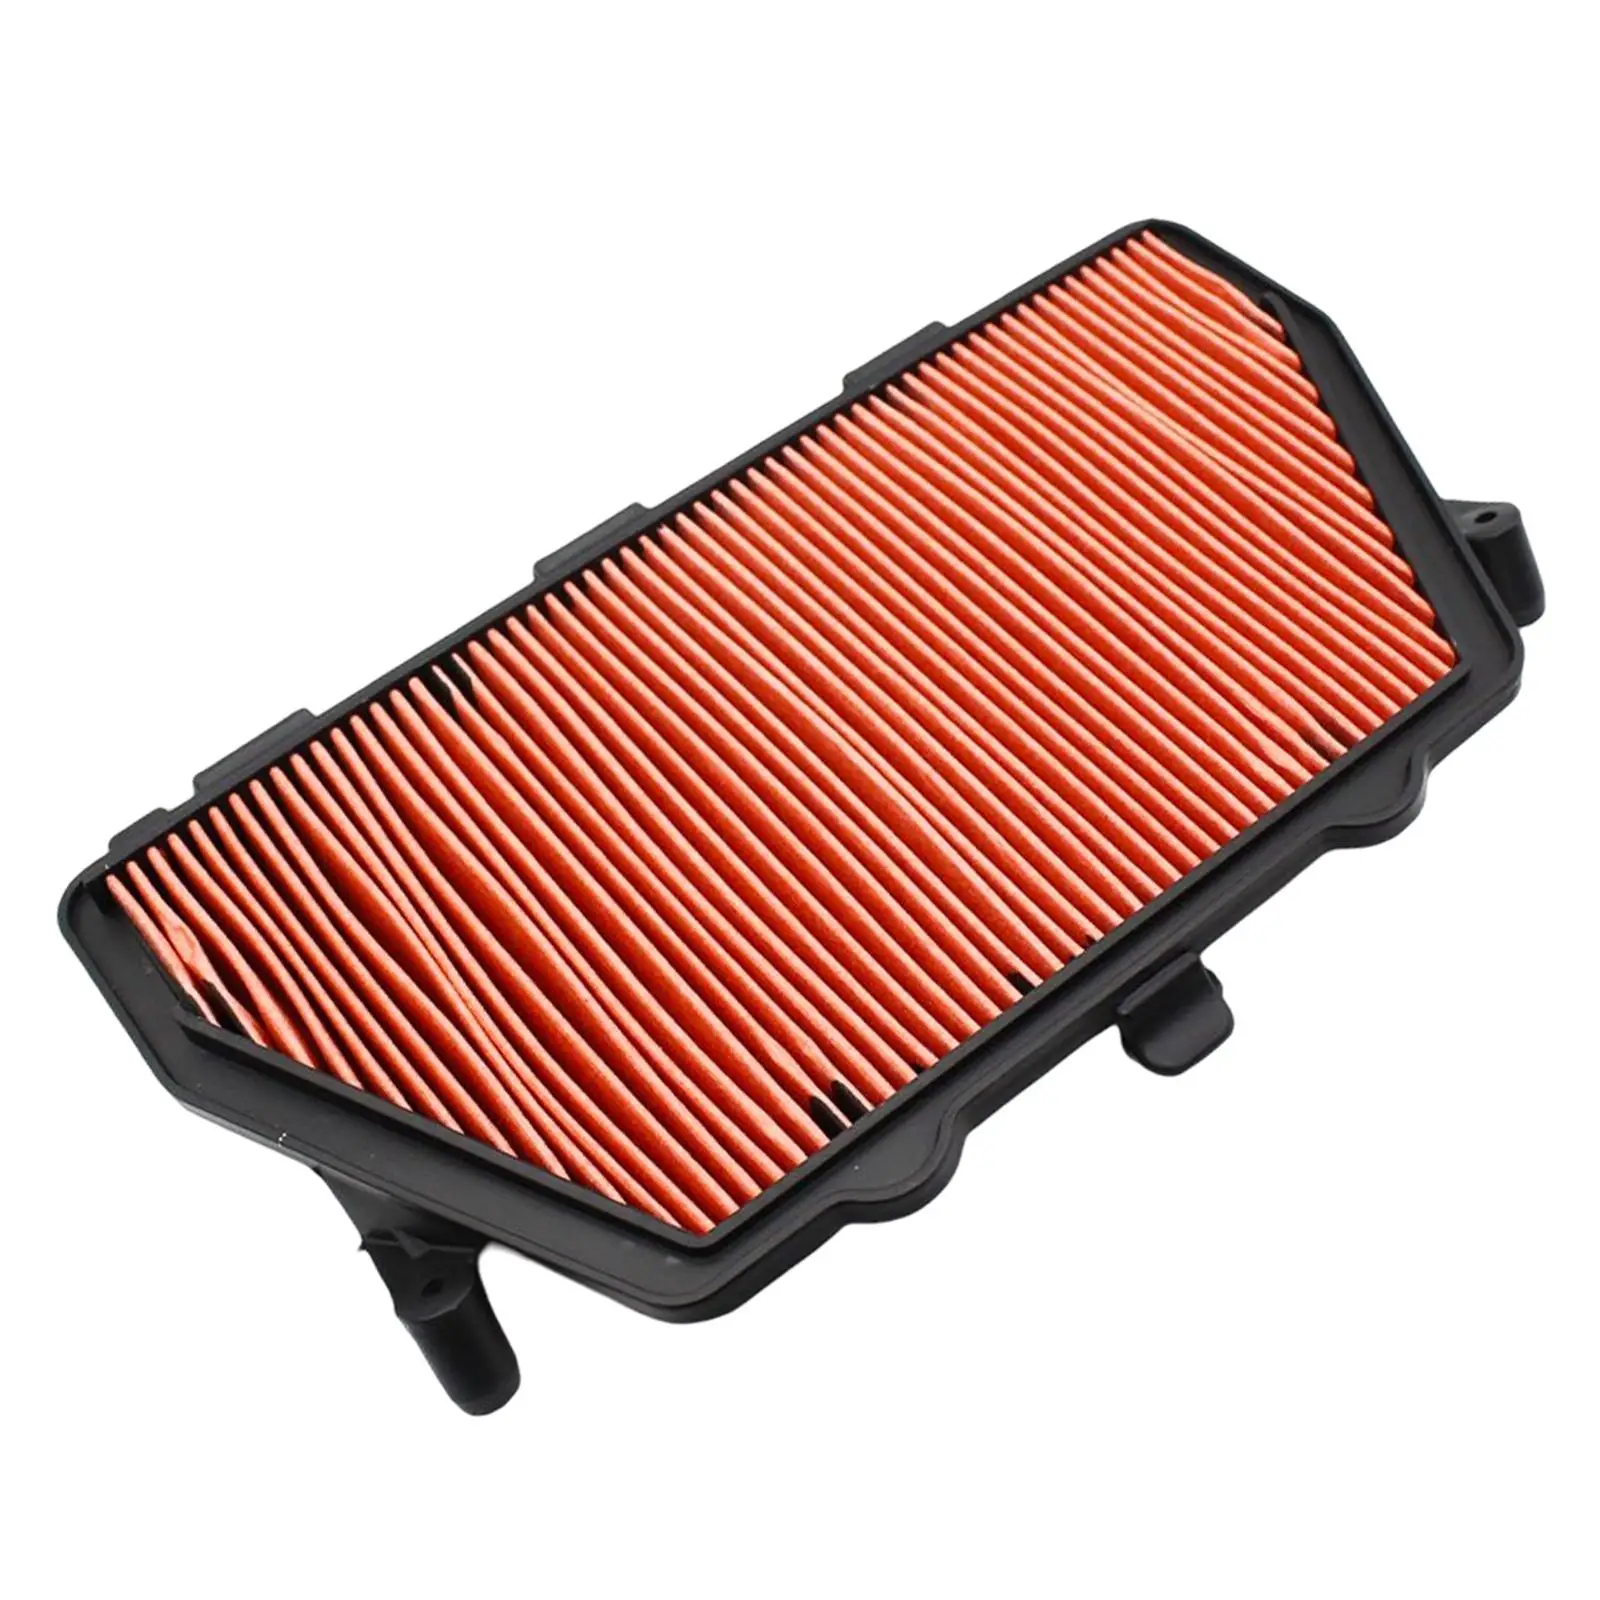 Air Filter 17210-Mfl-000 Replace for CBR1000RA ABS CBR1000Rr SP CBR1000Rr ABS Motorcycle Parts